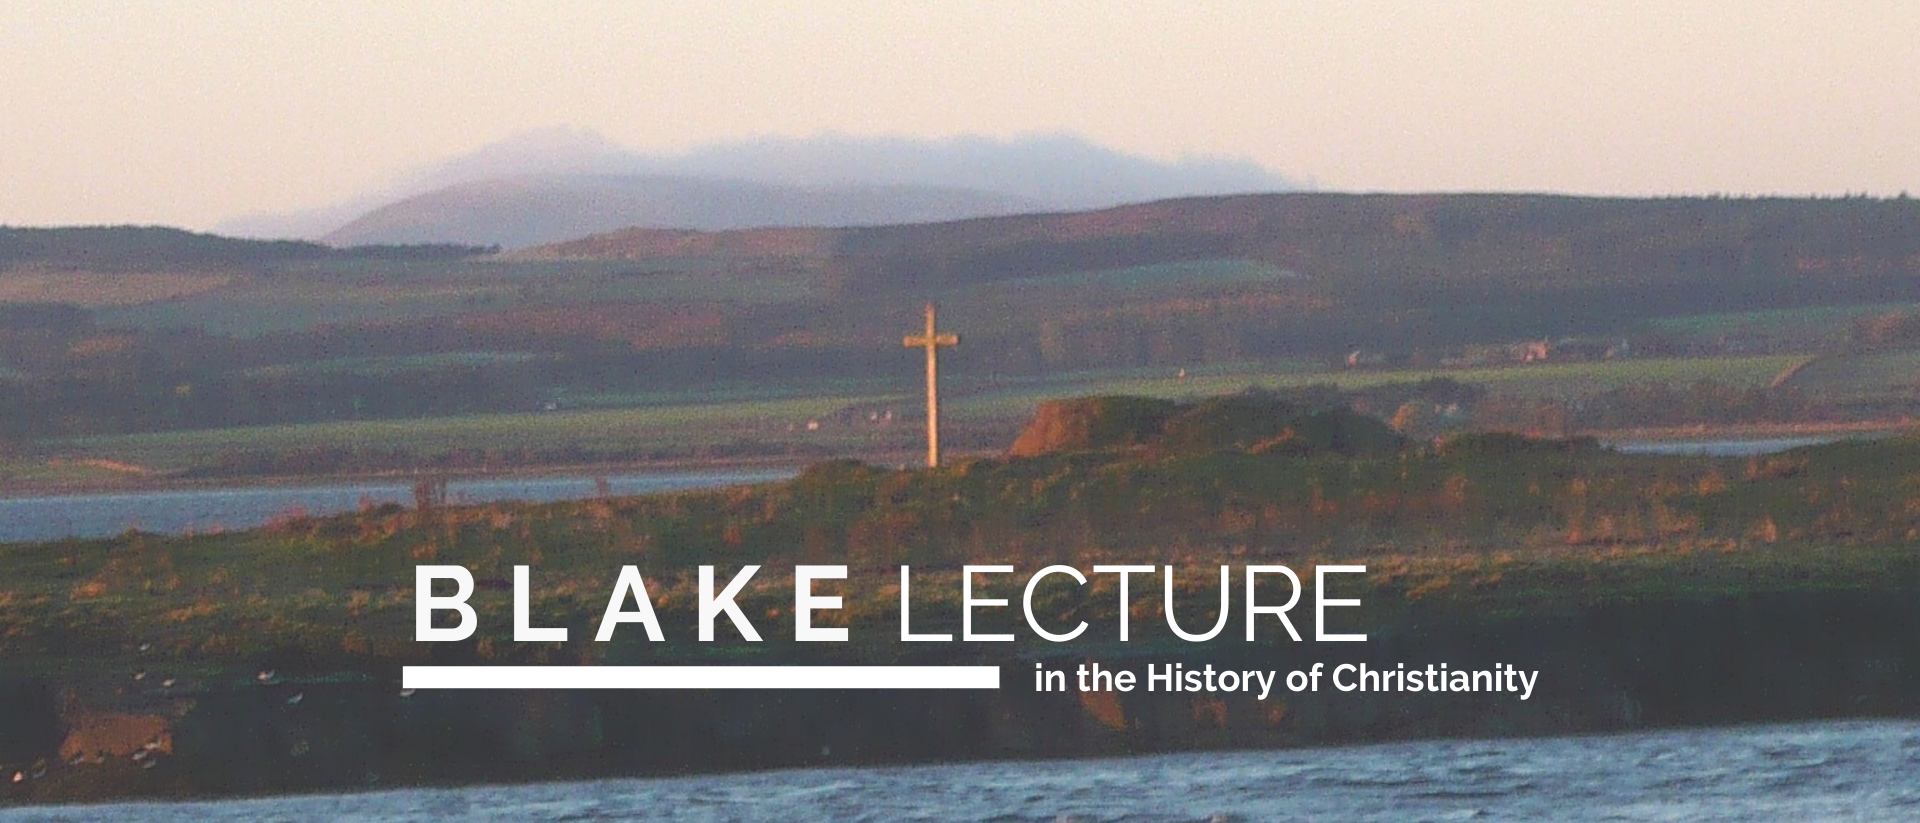 a landscape scene with hills. a cross is positioned on a hill. text: blake lecture in the history of christianity